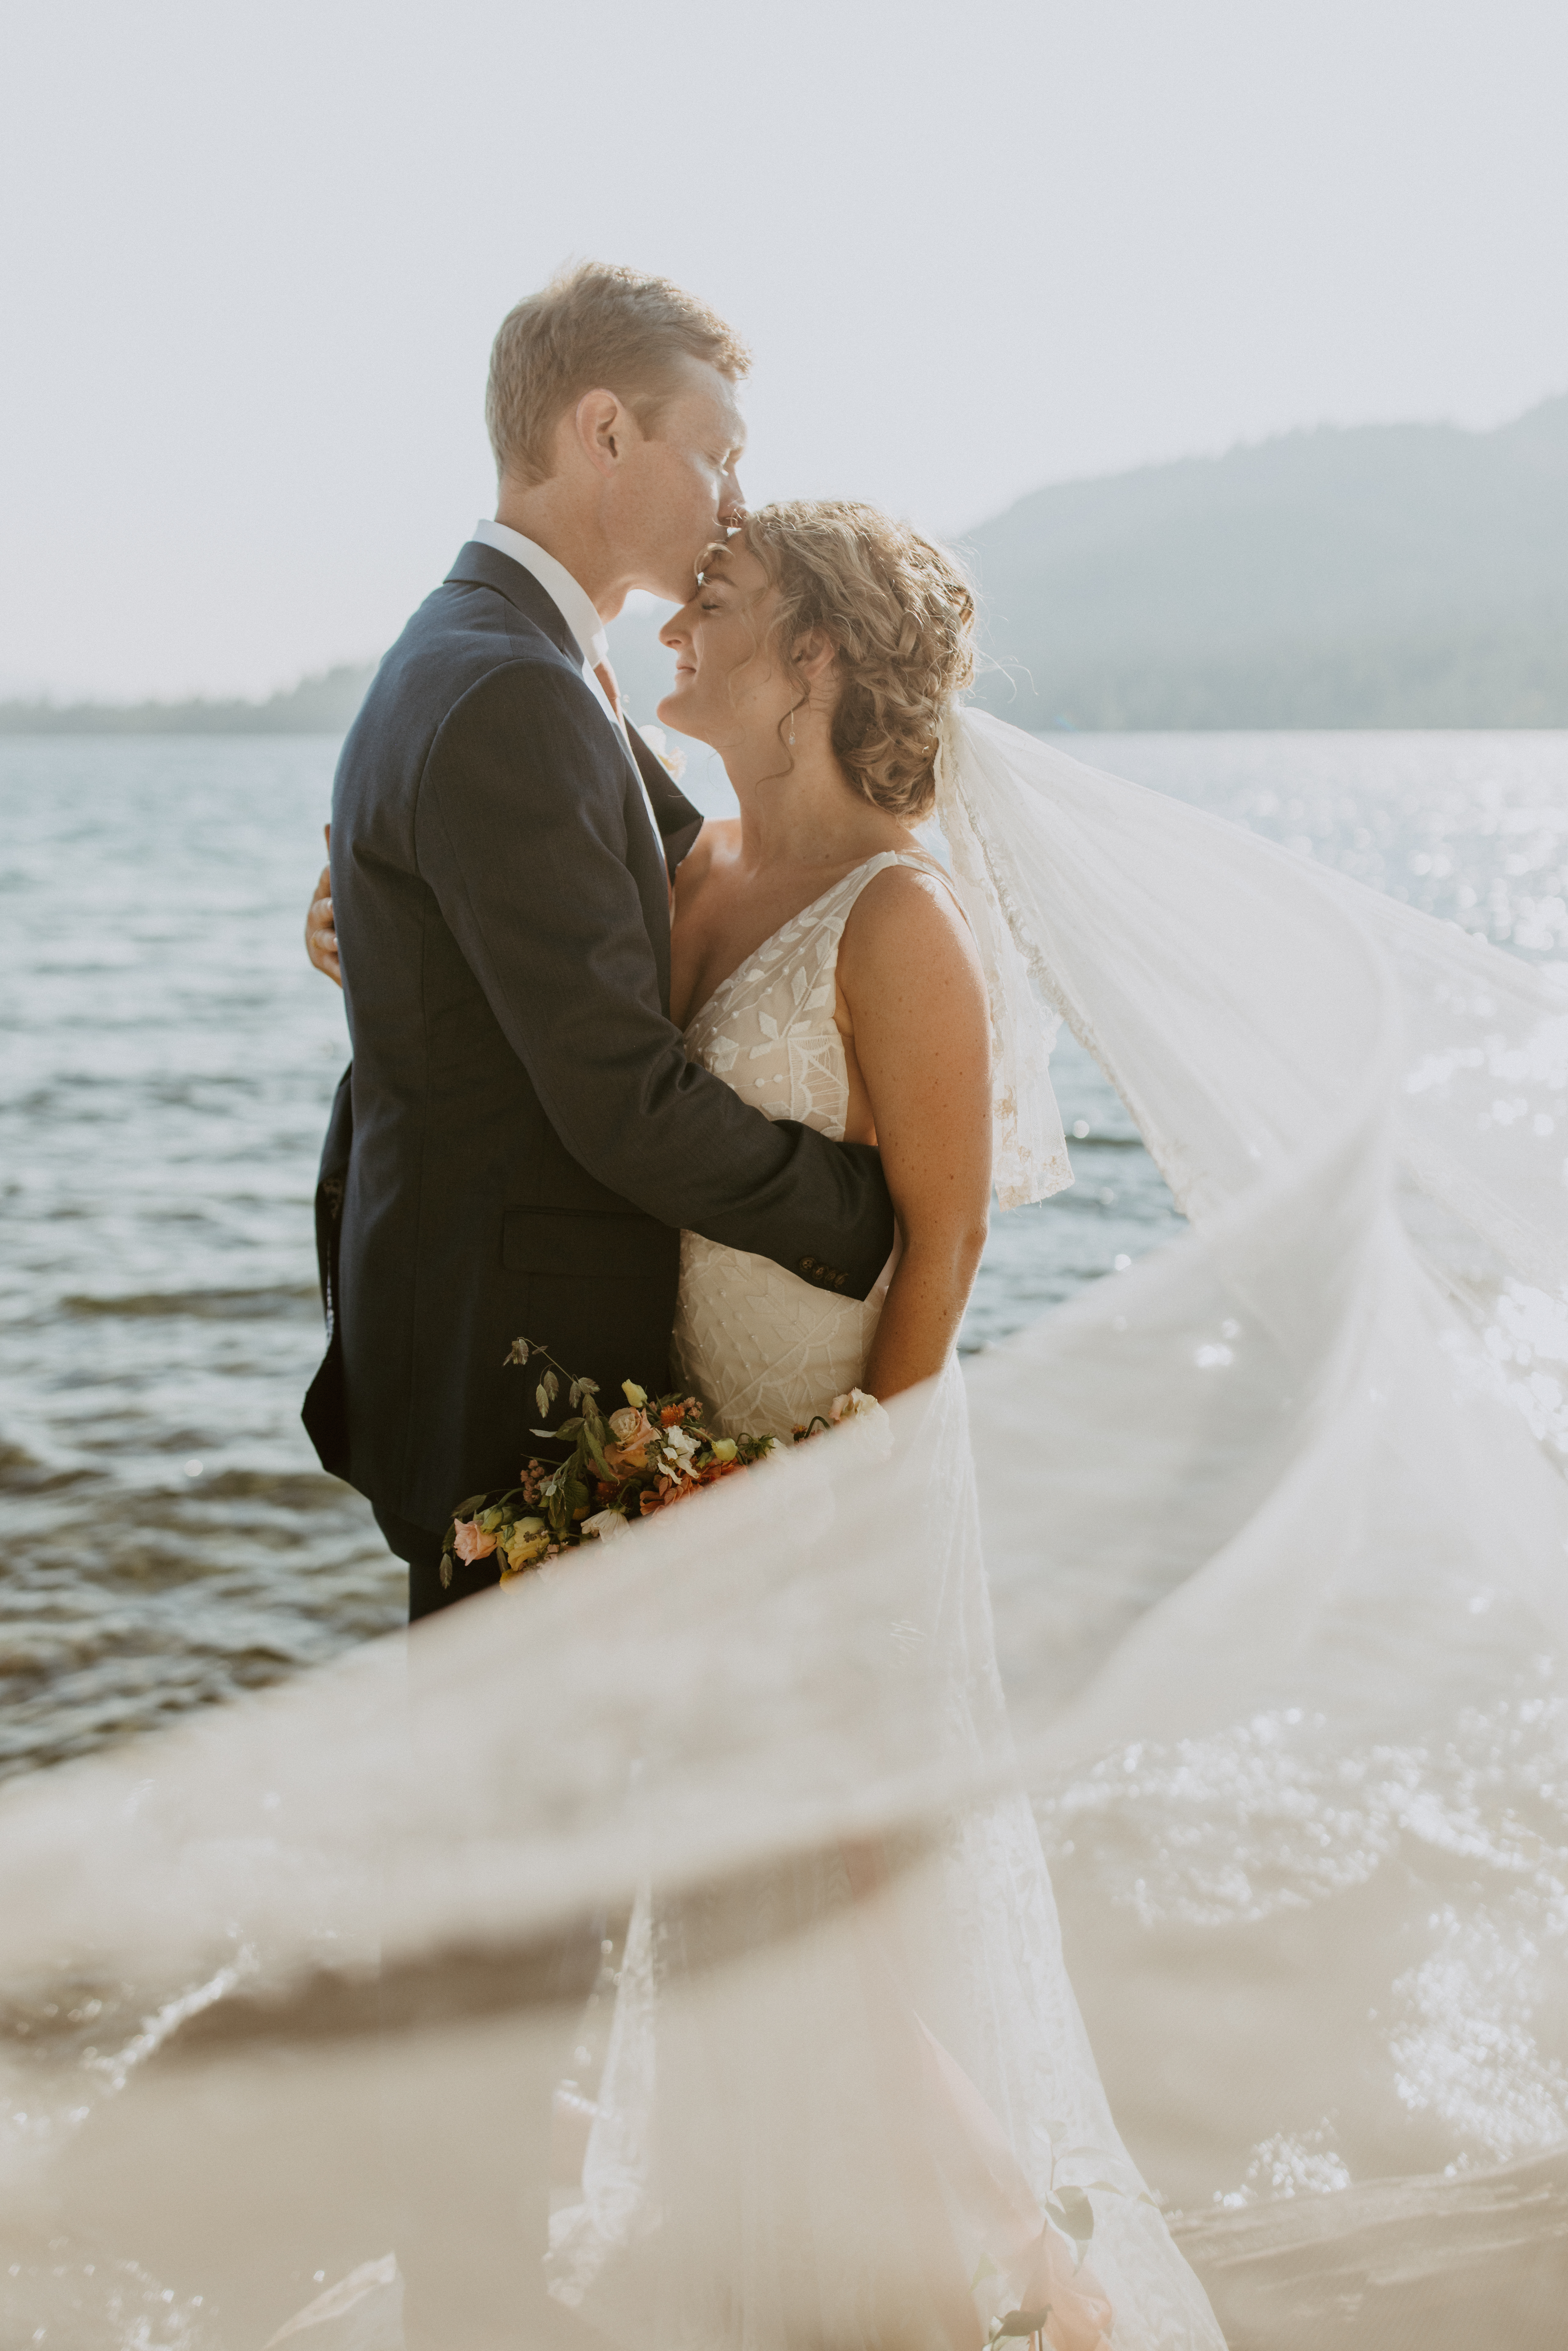 The dreamiest summer camp themed wedding on Flathead Lake in MT